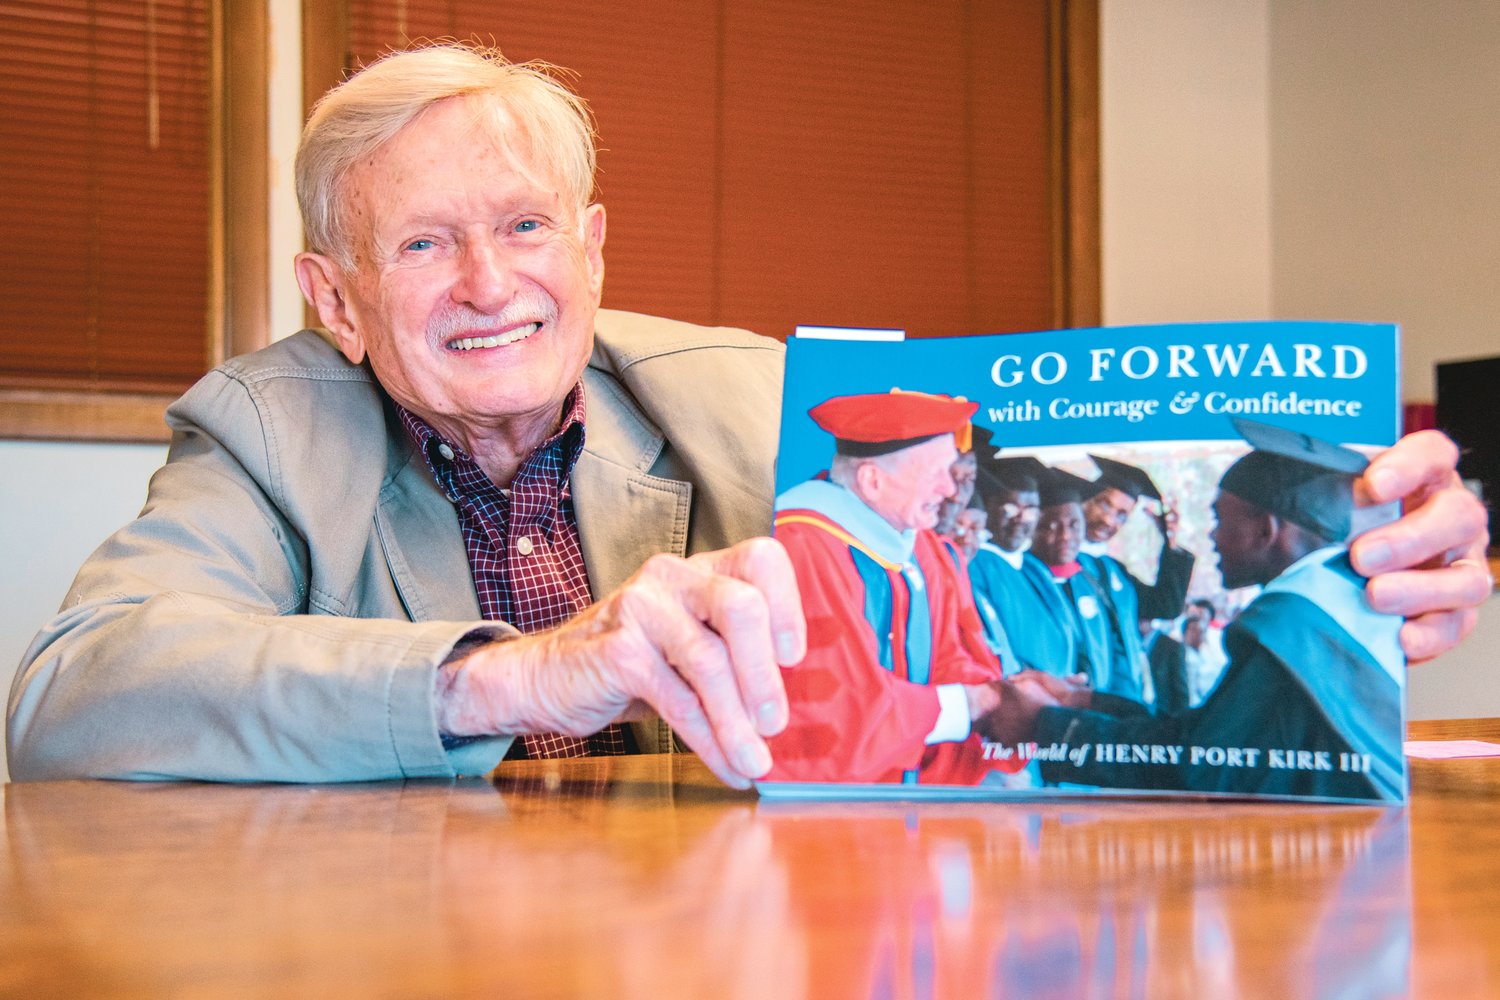 Henry Port Kirk III smiles and holds up his book "Go Forward with Courage & Confidence" Tuesday in Centralia.